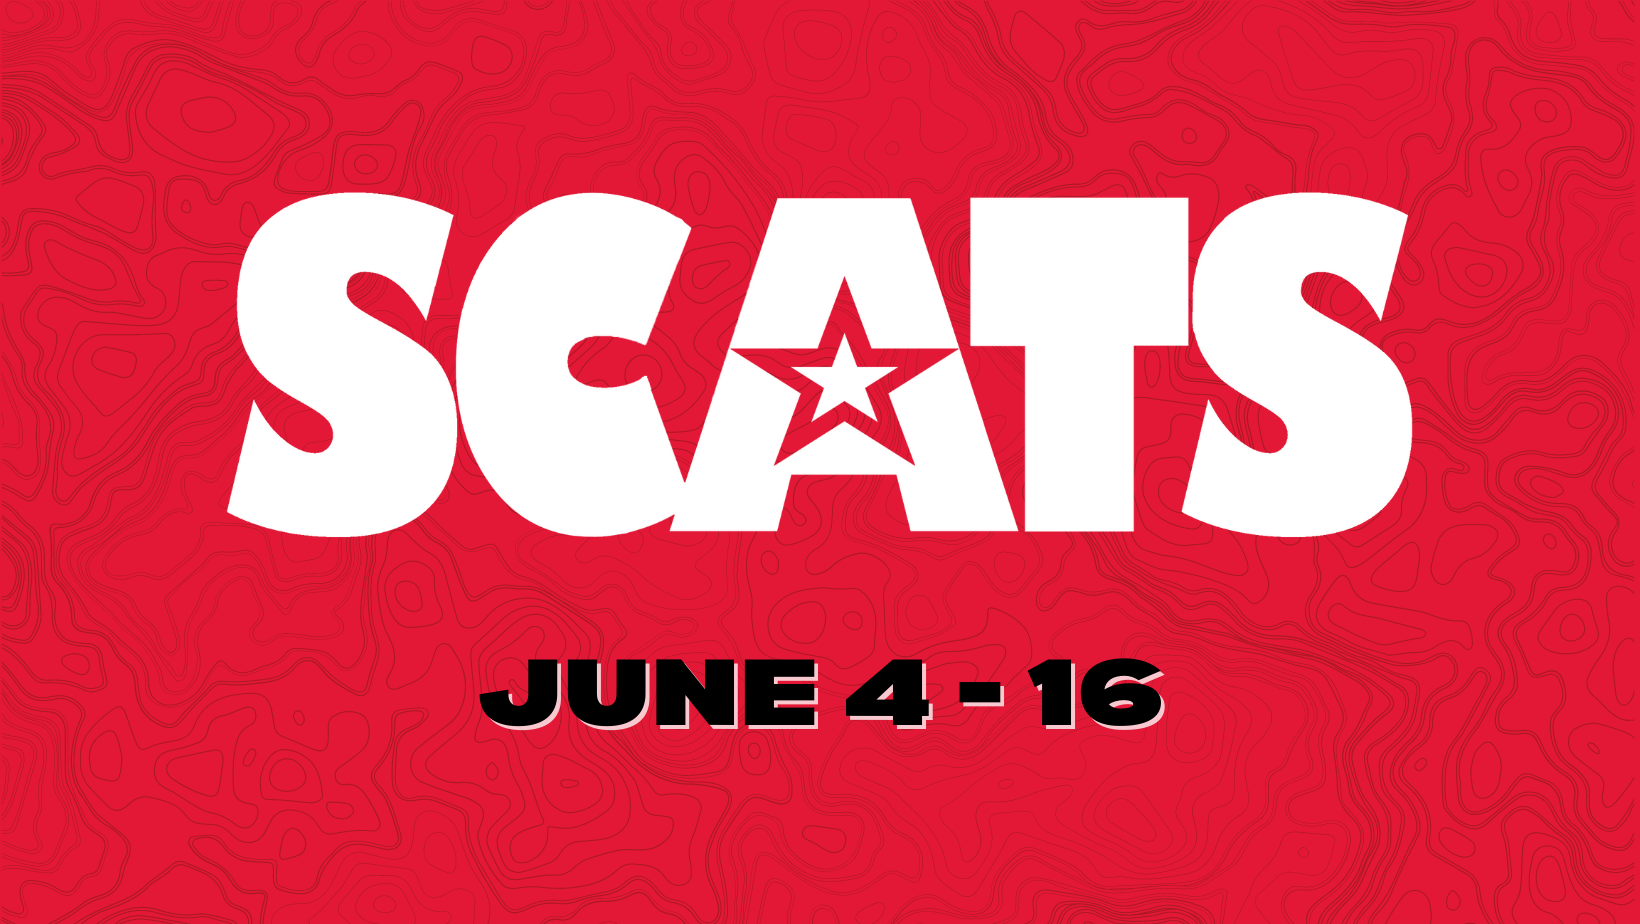 scats event header with date june 4-16